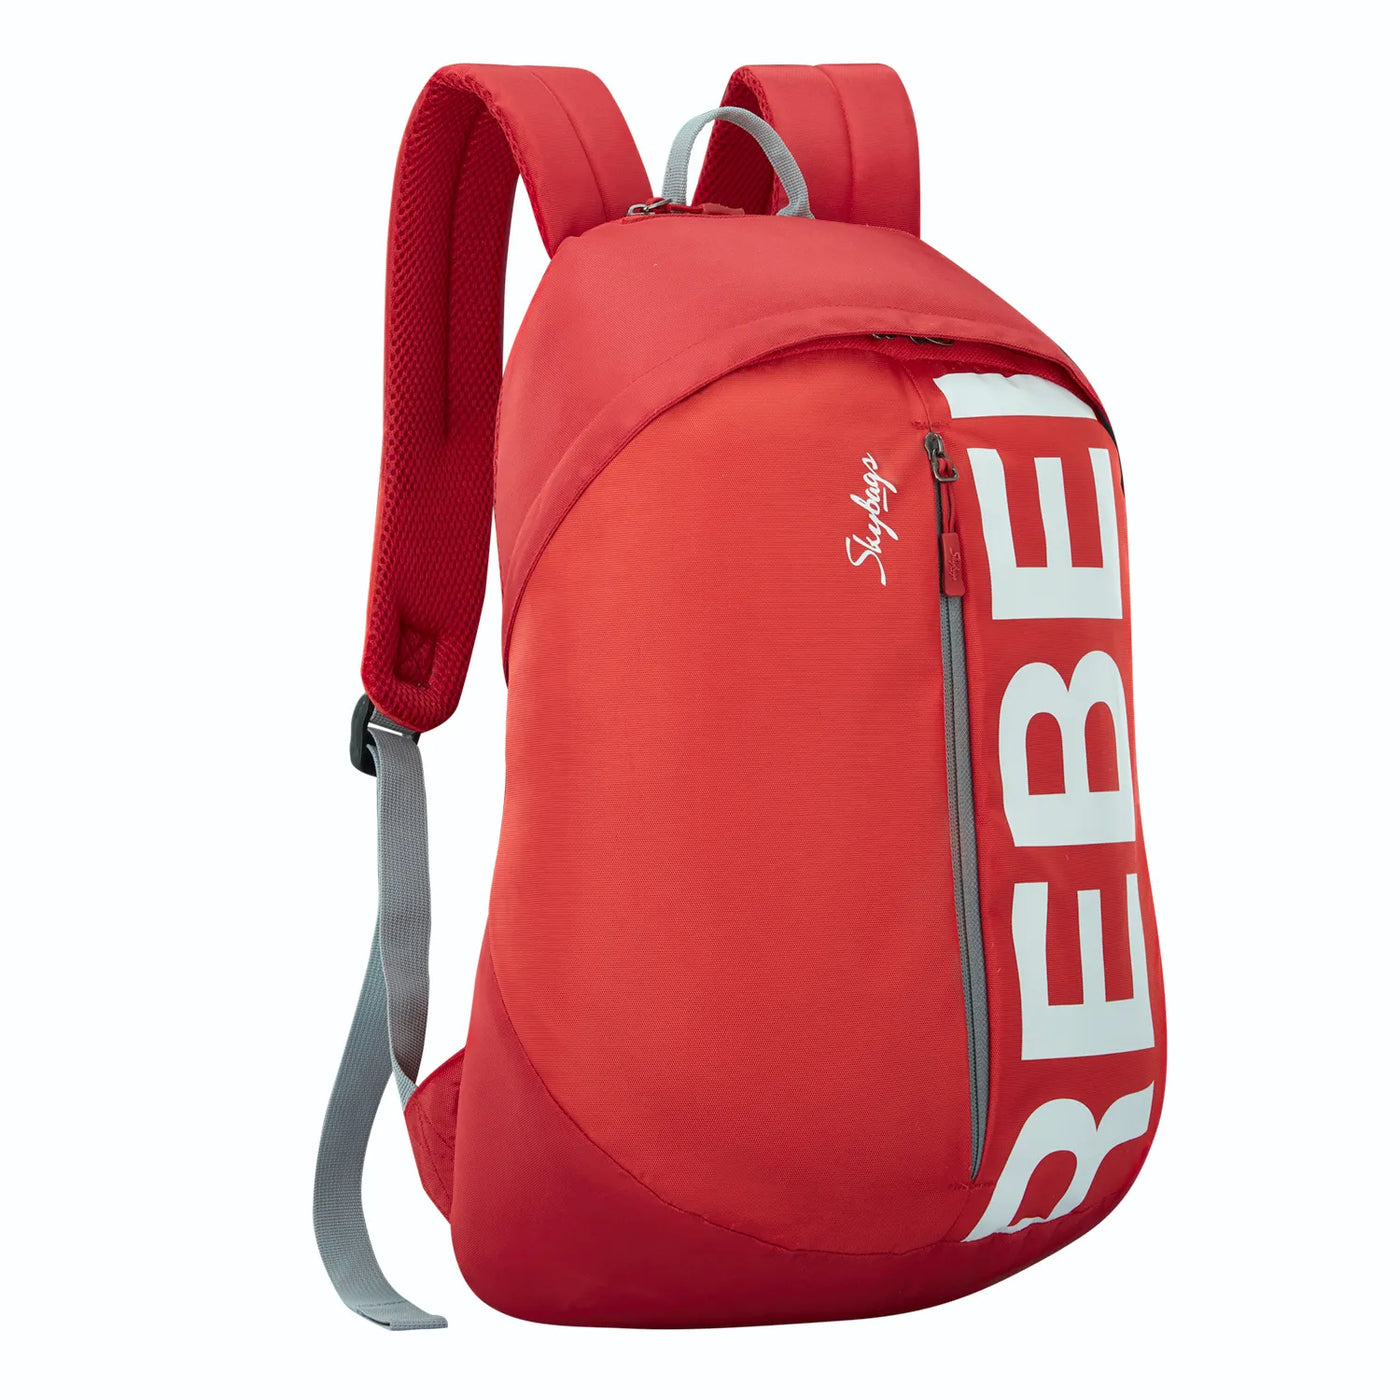 Skybags Boho "02 Backpack" Red